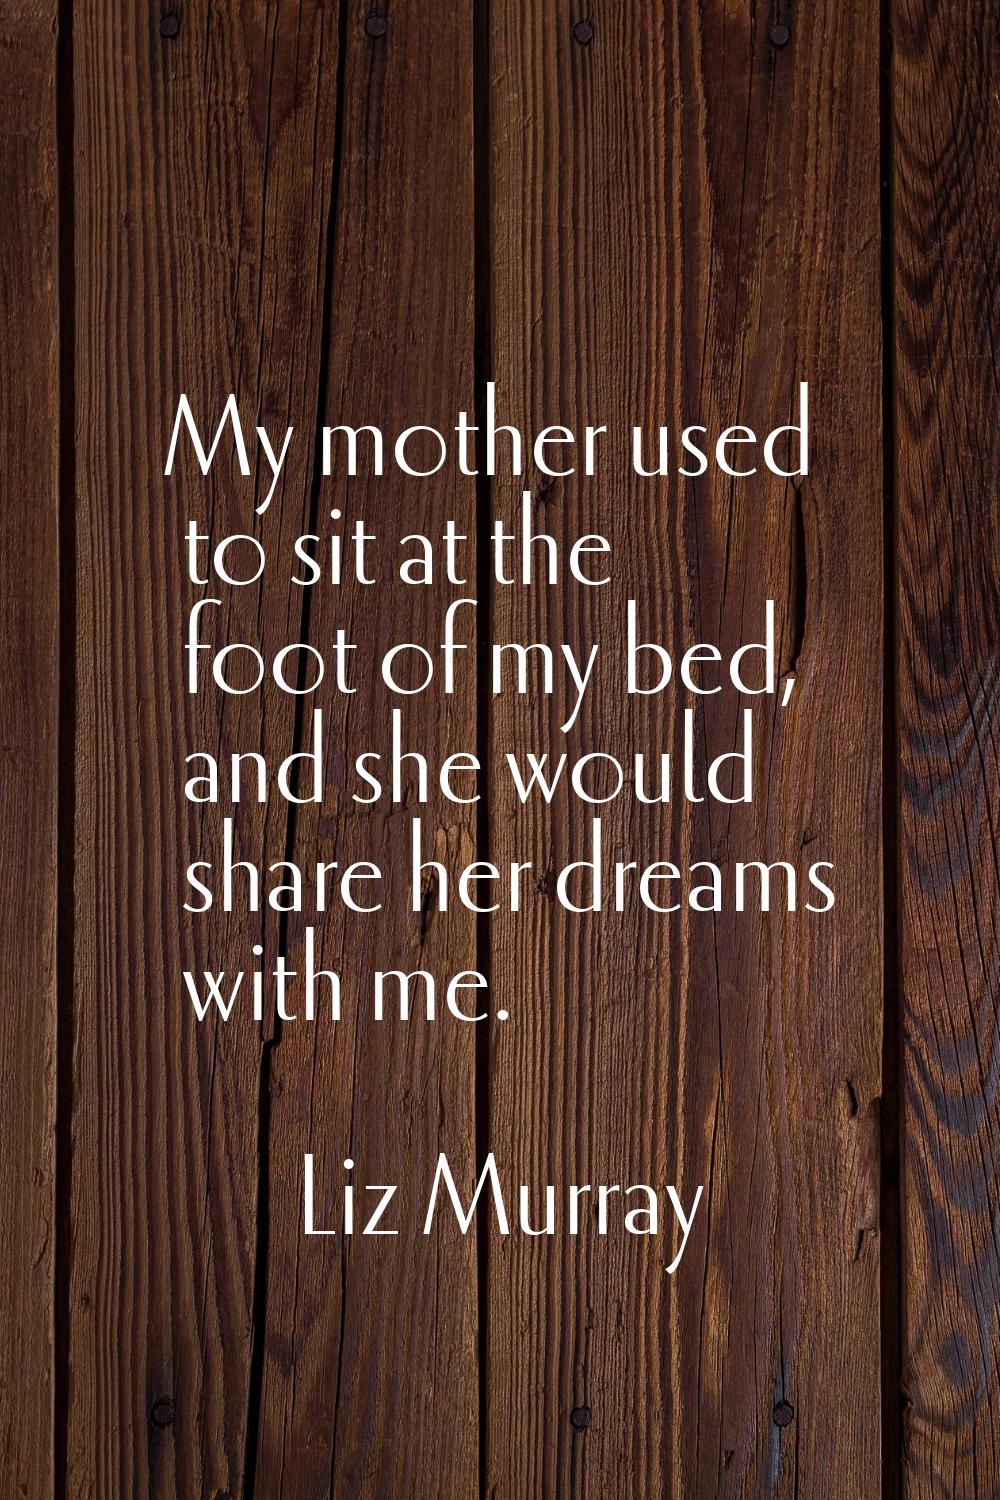 My mother used to sit at the foot of my bed, and she would share her dreams with me.